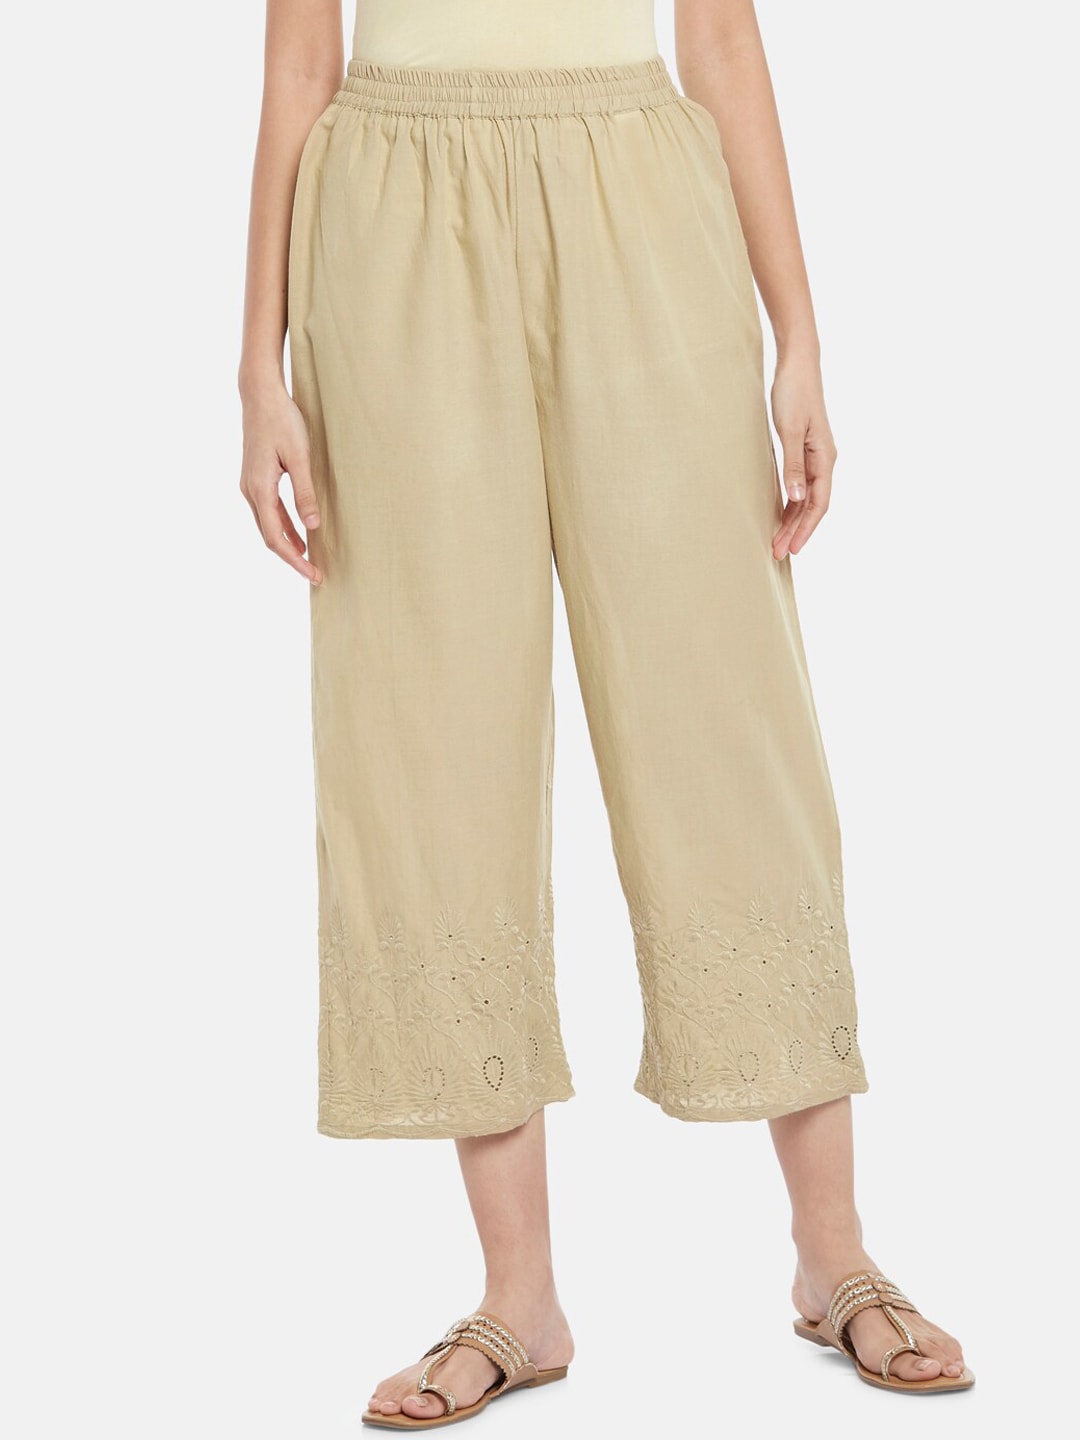 RANGMANCH BY PANTALOONS Women Beige Culottes Trousers Price in India